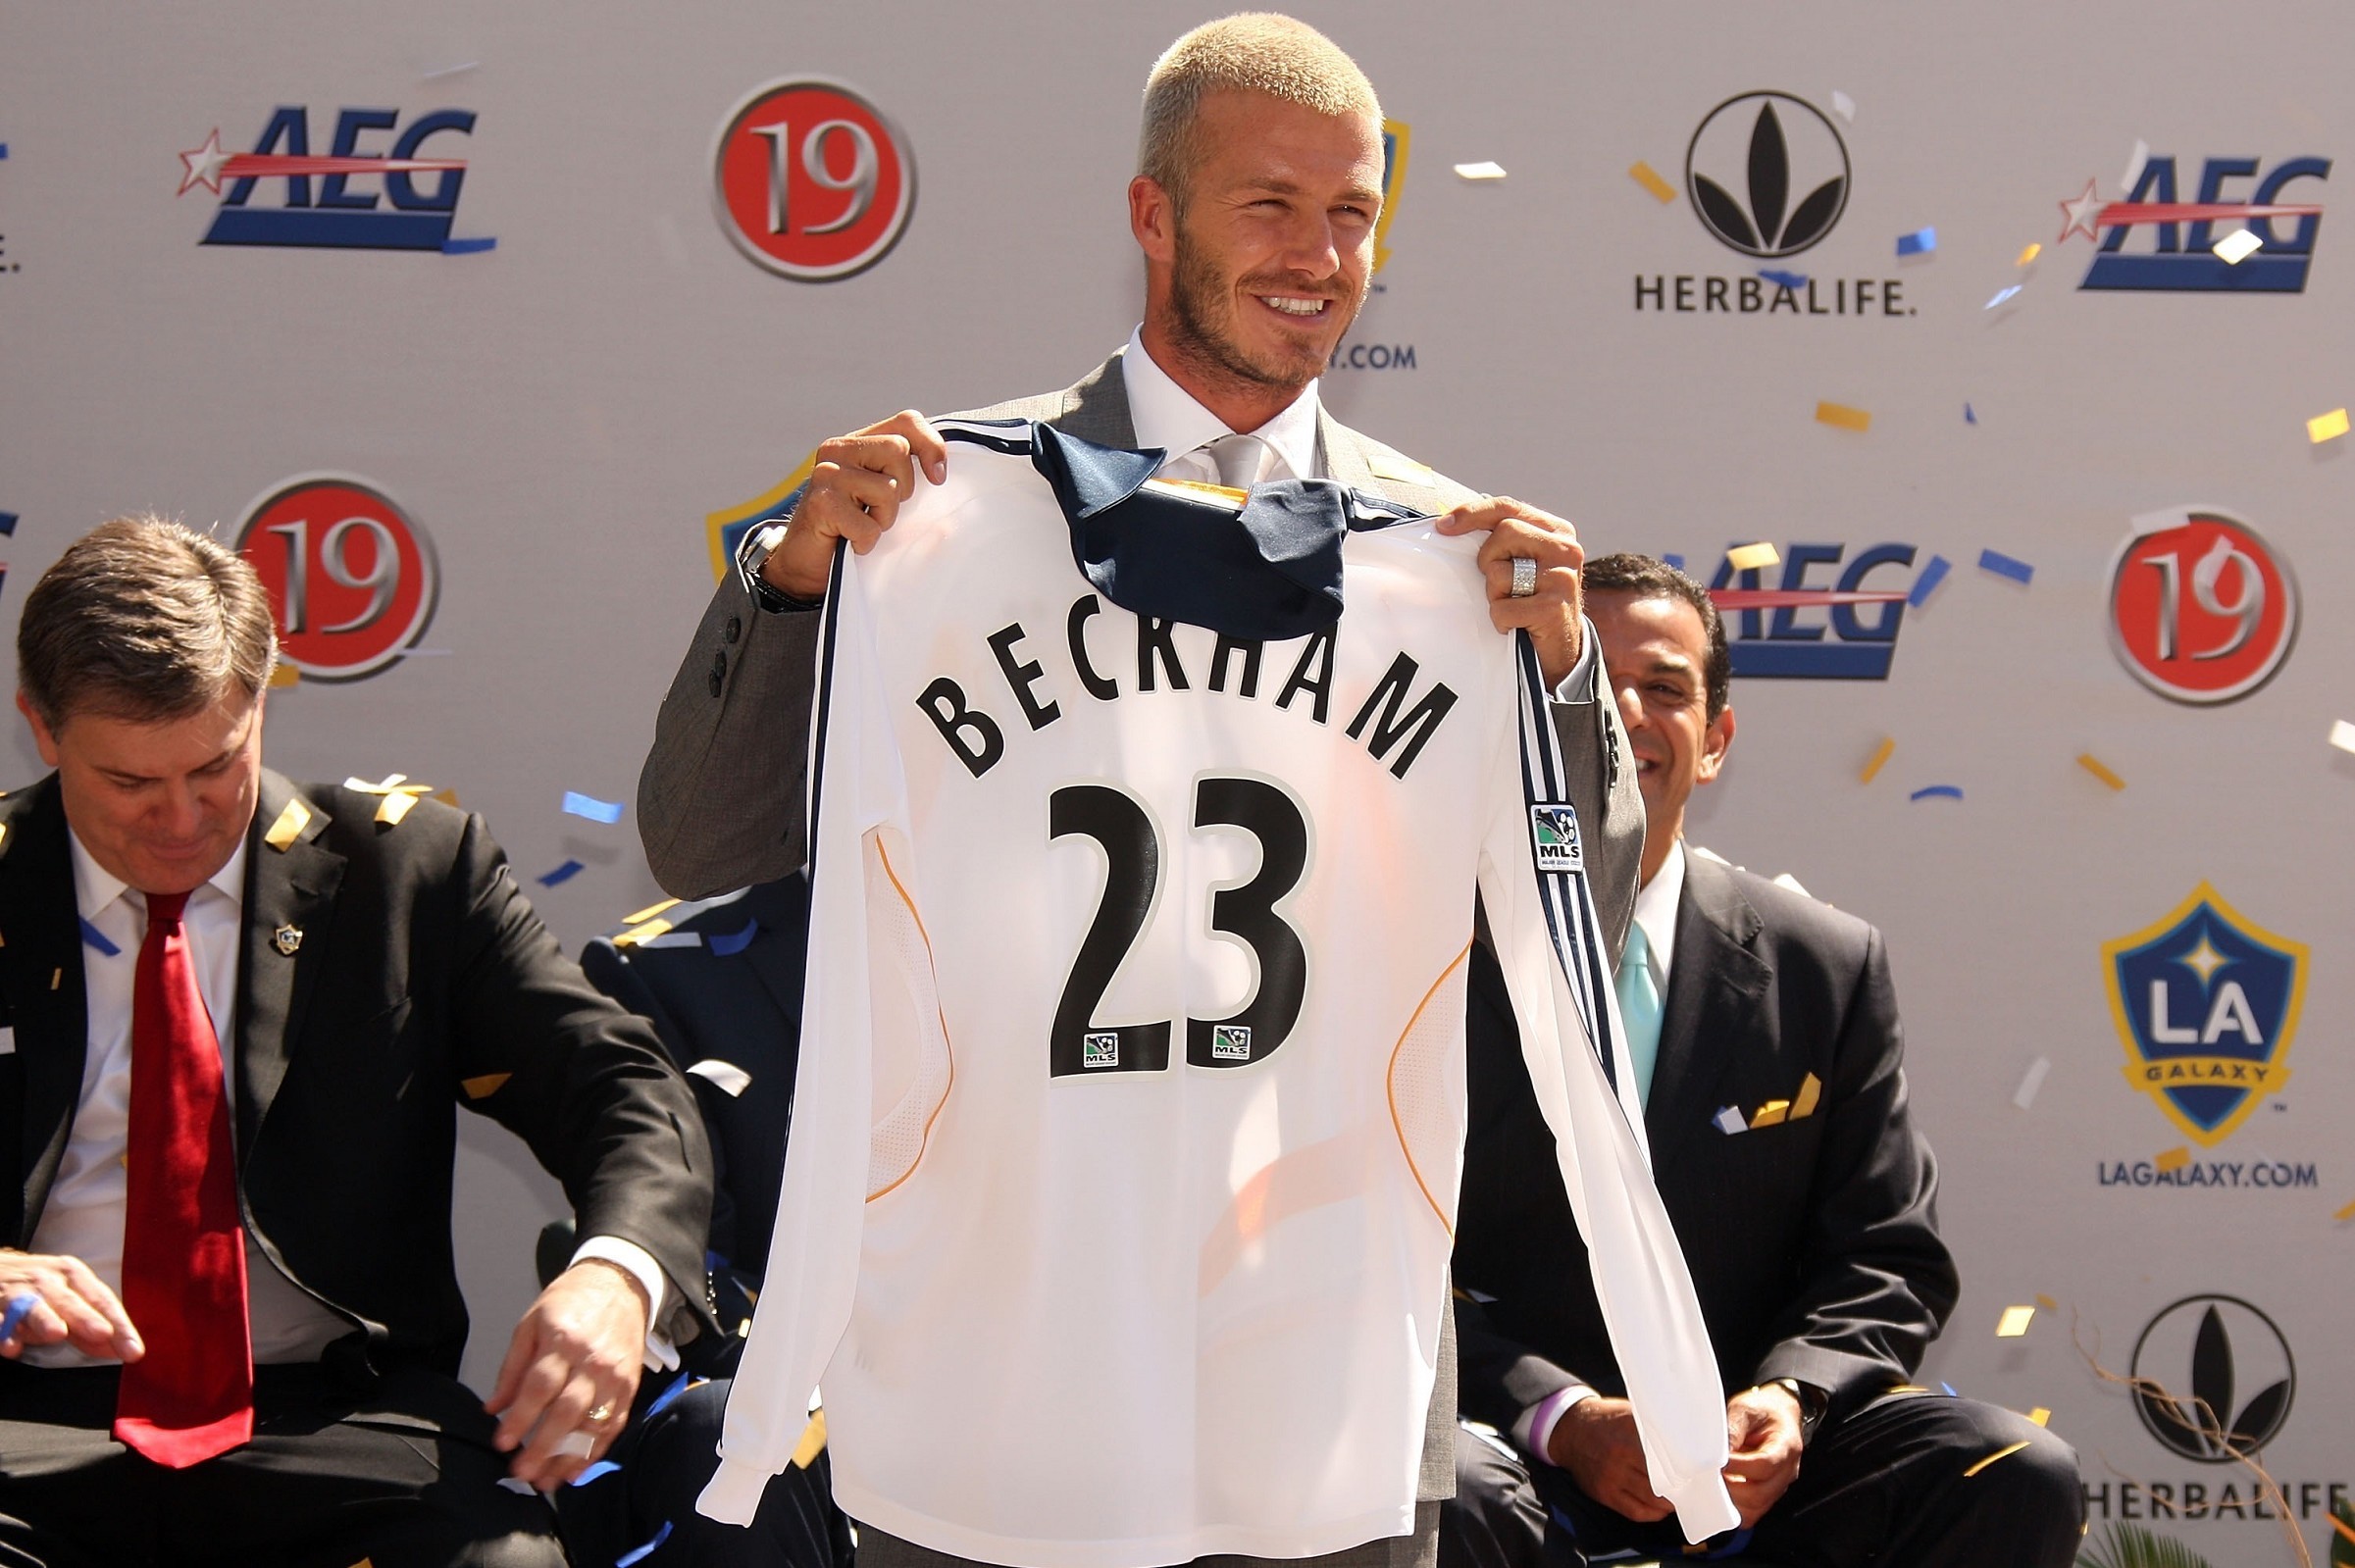 David Beckham's shirt that auctioned for almost $500,000